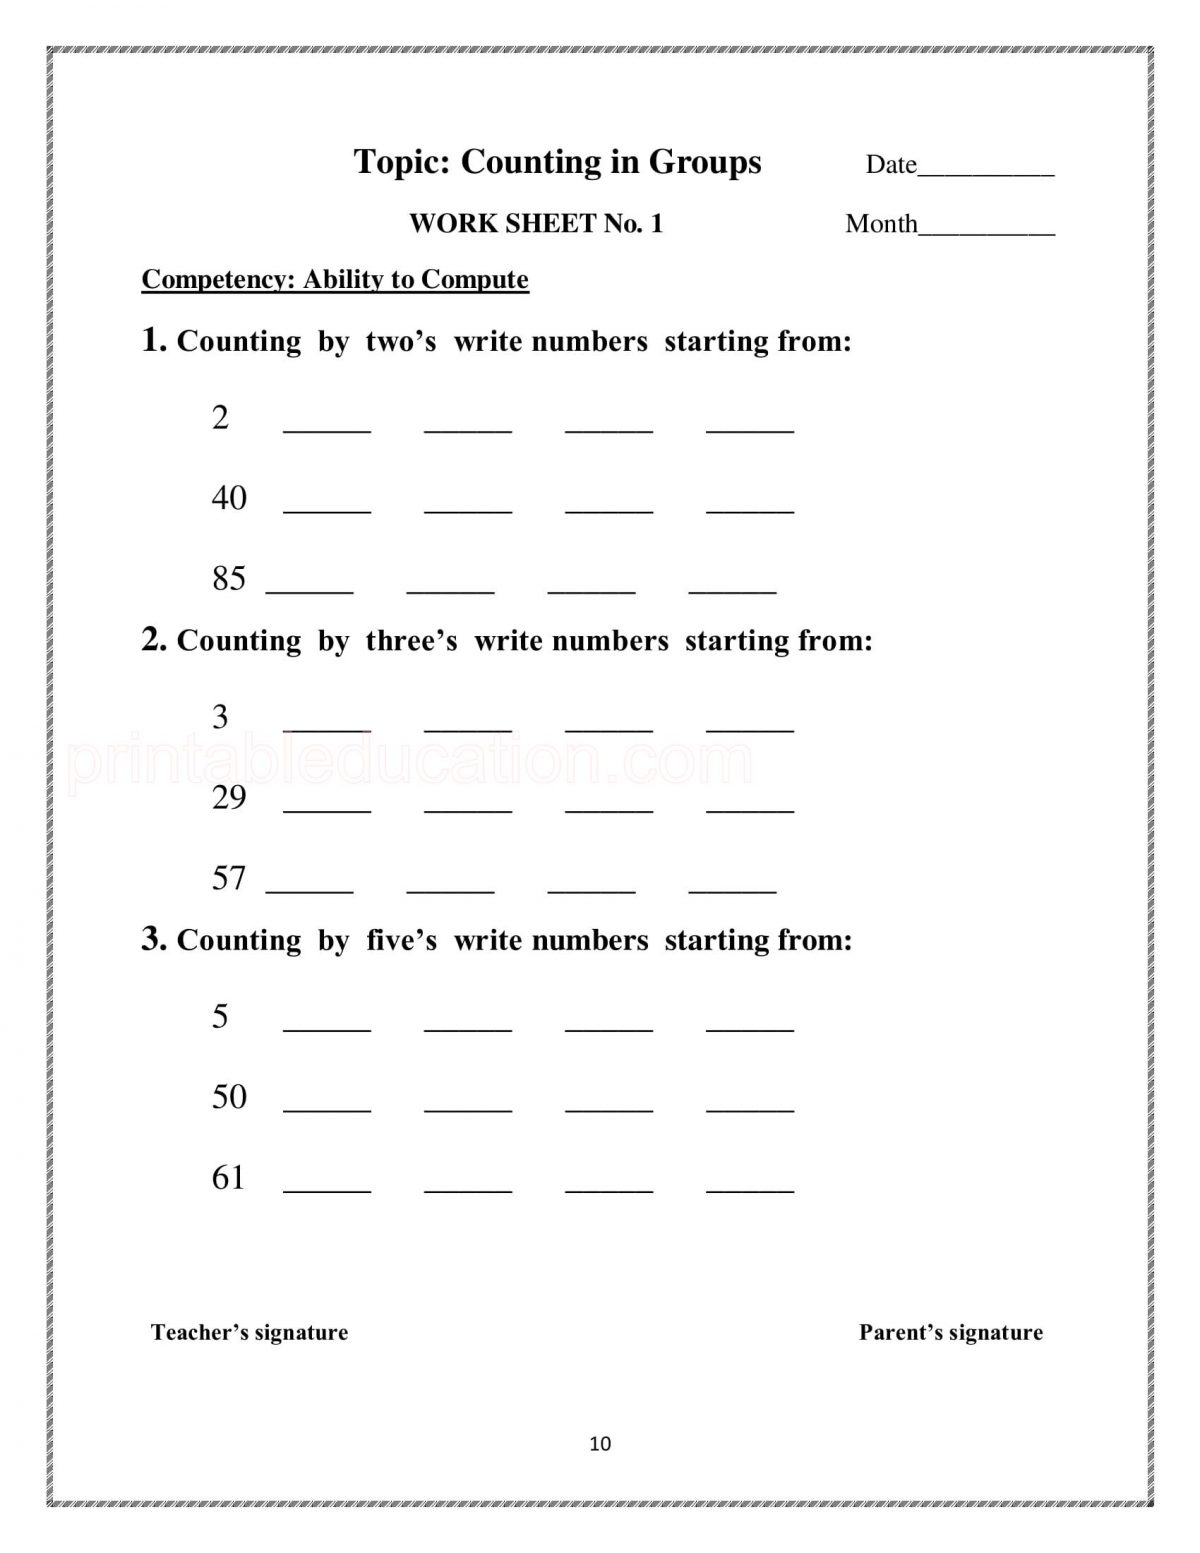 25-math-counting-numbers-worksheets-printableducation